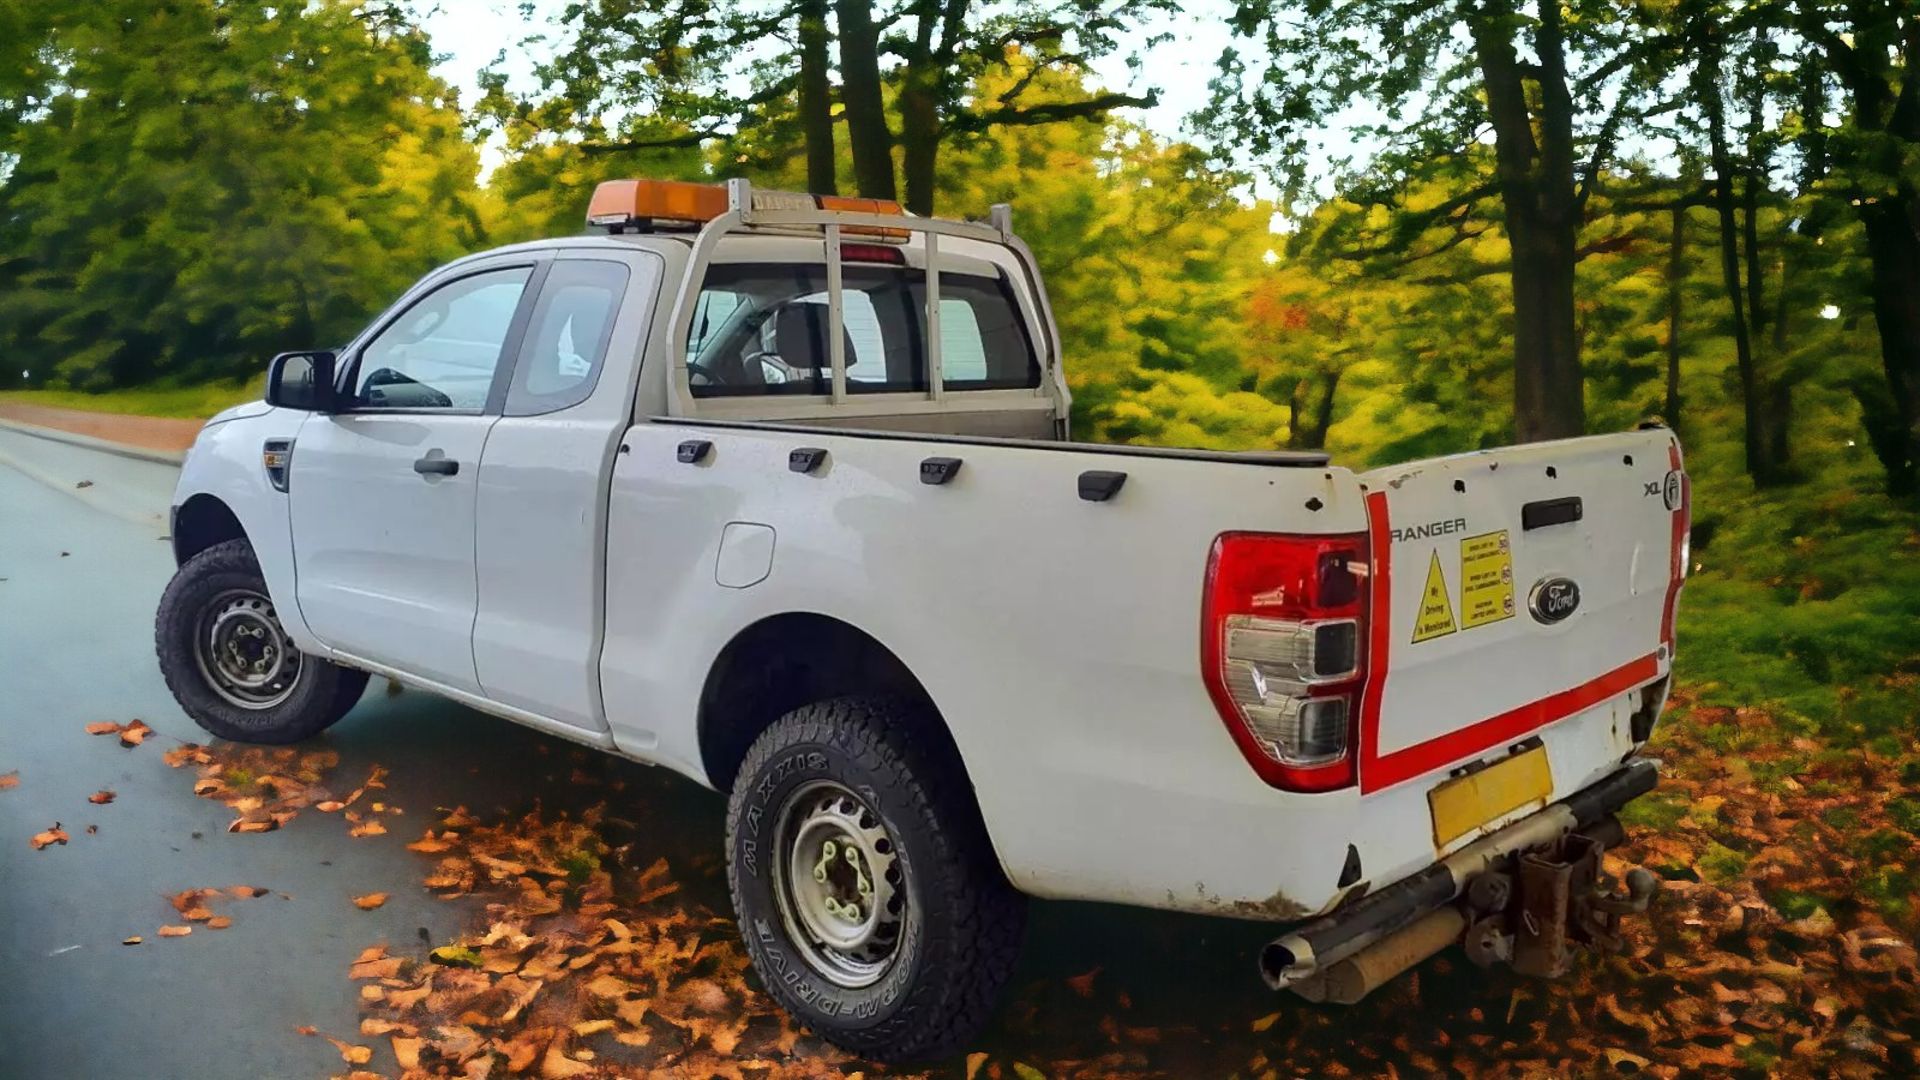 FORD RANGER XL SUPER CAB 4X4 PICKUP: BUILT TOUGH FOR EVERY ADVENTURE - Image 3 of 9